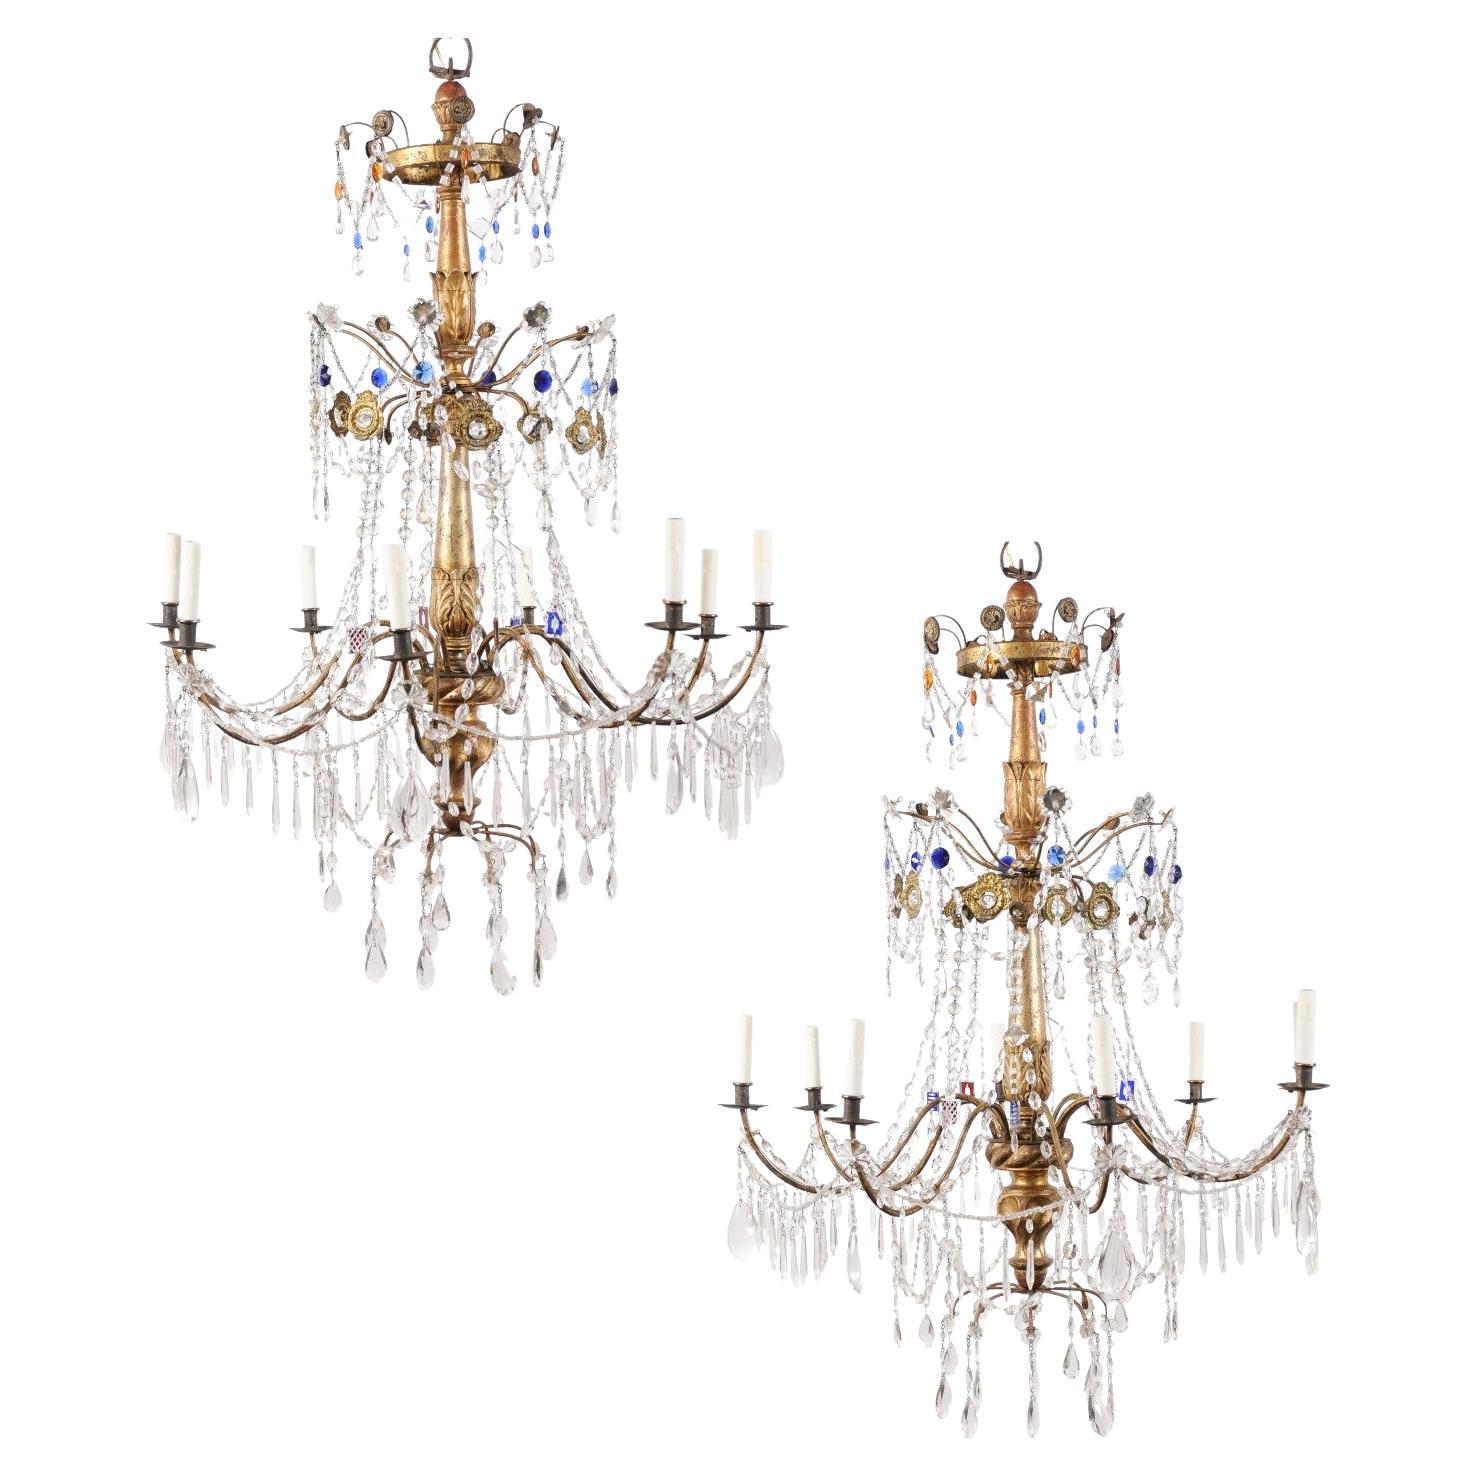 Pair of Italian Neoclassical Giltwood & Crystal 8 Light Chandelier For Sale